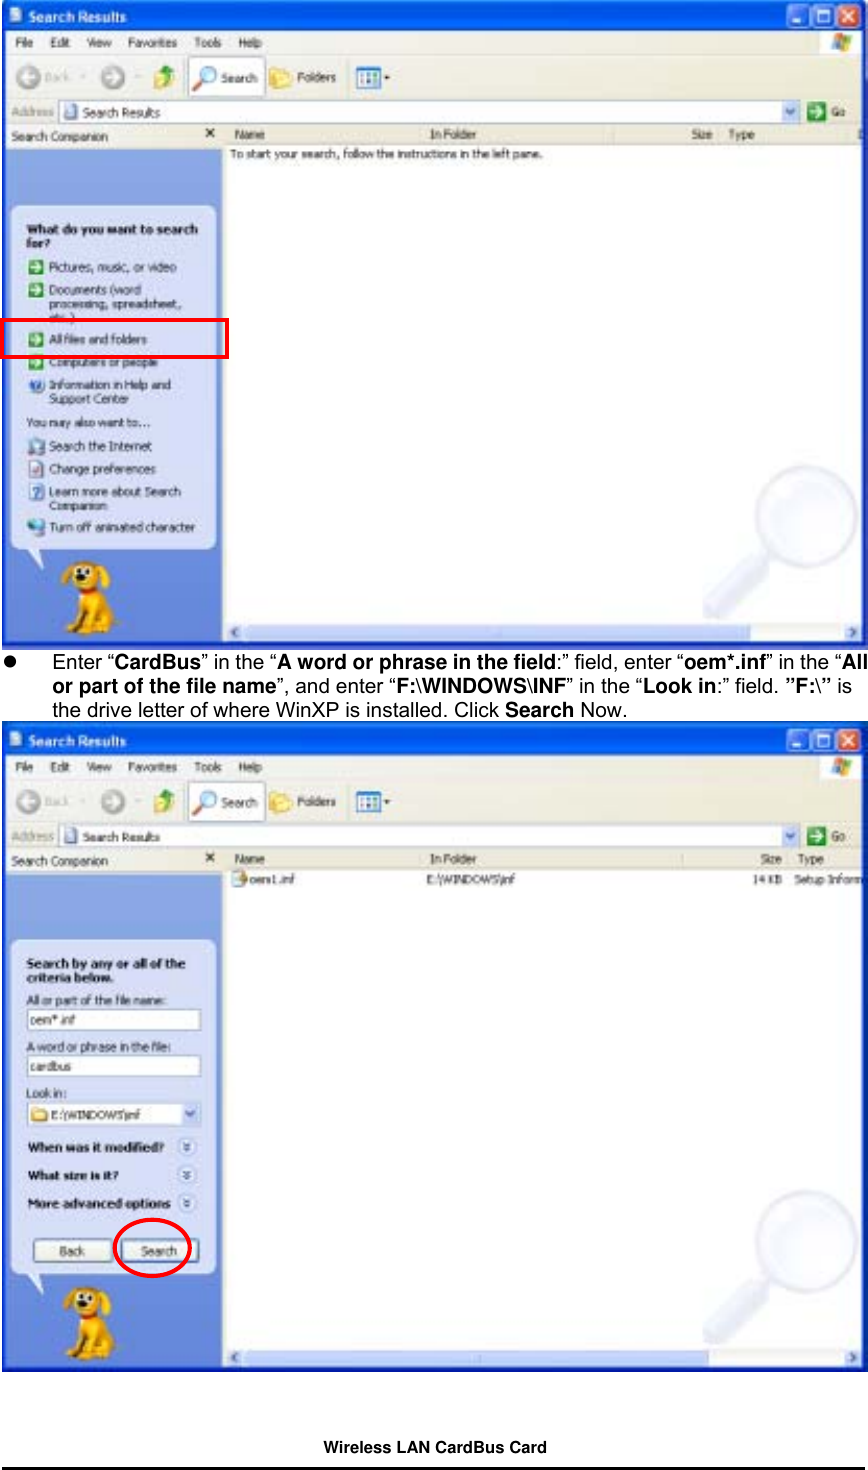    Enter “CardBus” in the “A word or phrase in the field:” field, enter “oem*.inf” in the “All or part of the file name”, and enter “F:\WINDOWS\INF” in the “Look in:” field. ”F:\” is the drive letter of where WinXP is installed. Click Search Now.    Wireless LAN CardBus Card 